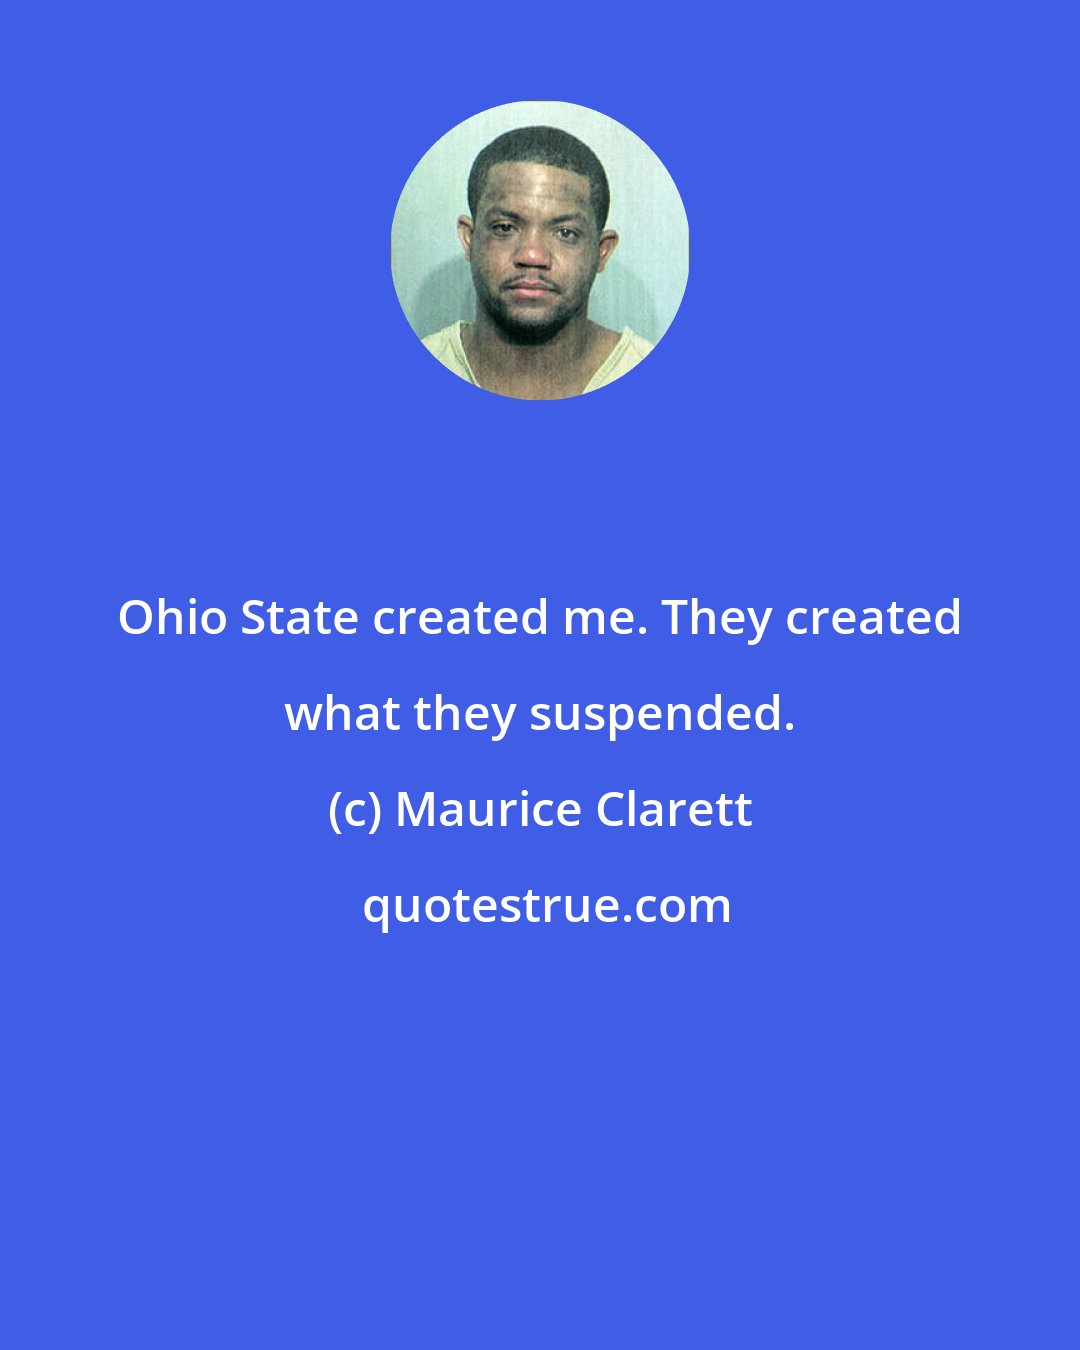 Maurice Clarett: Ohio State created me. They created what they suspended.